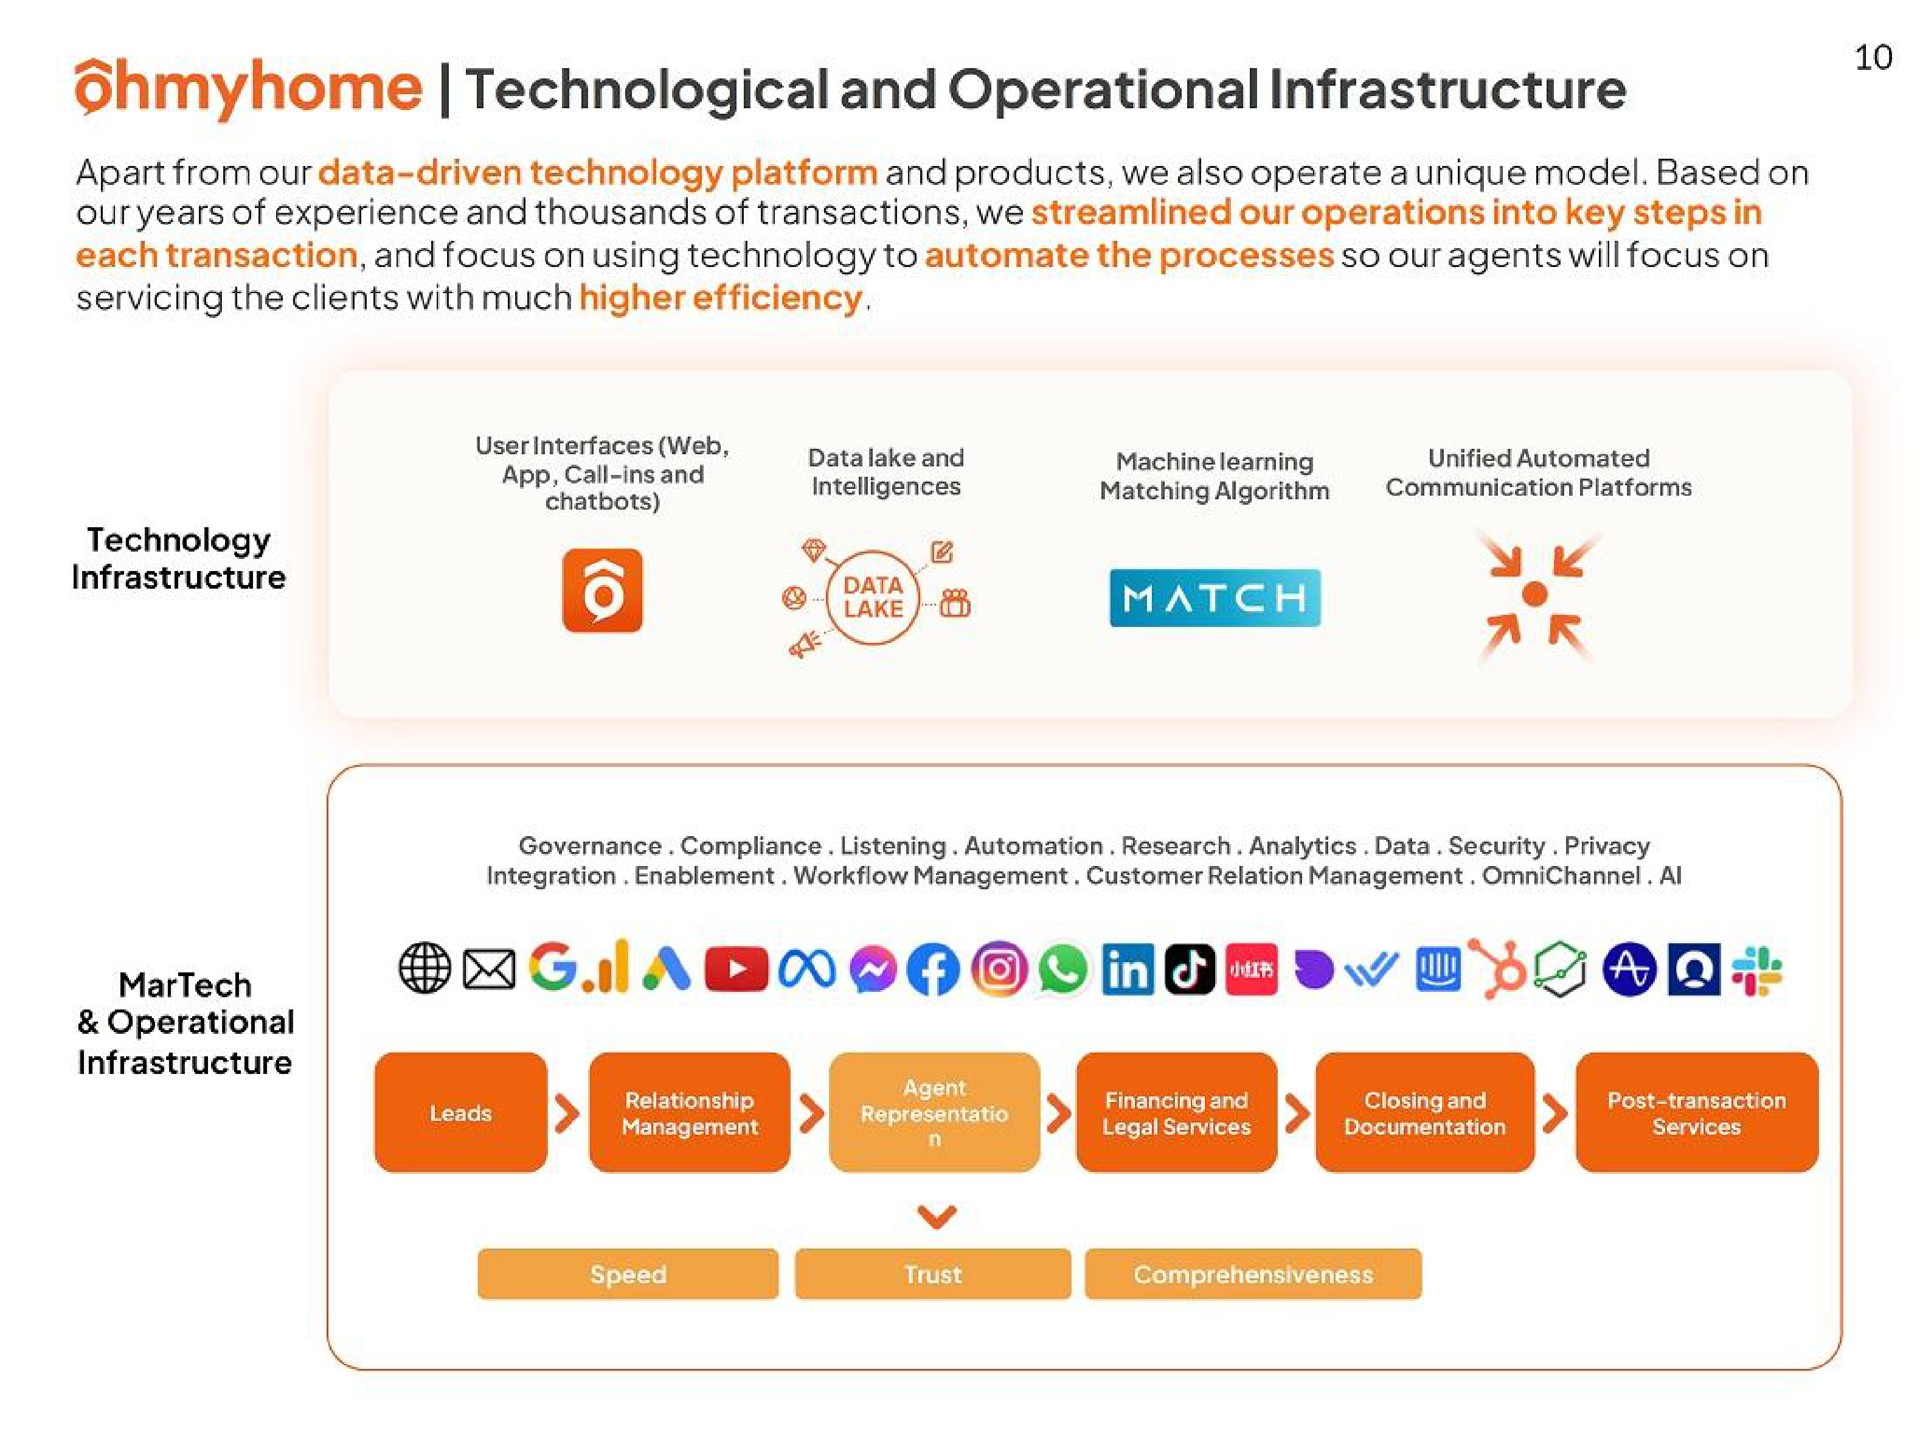 technological and operational infrastructure hop call | Ohmyhome